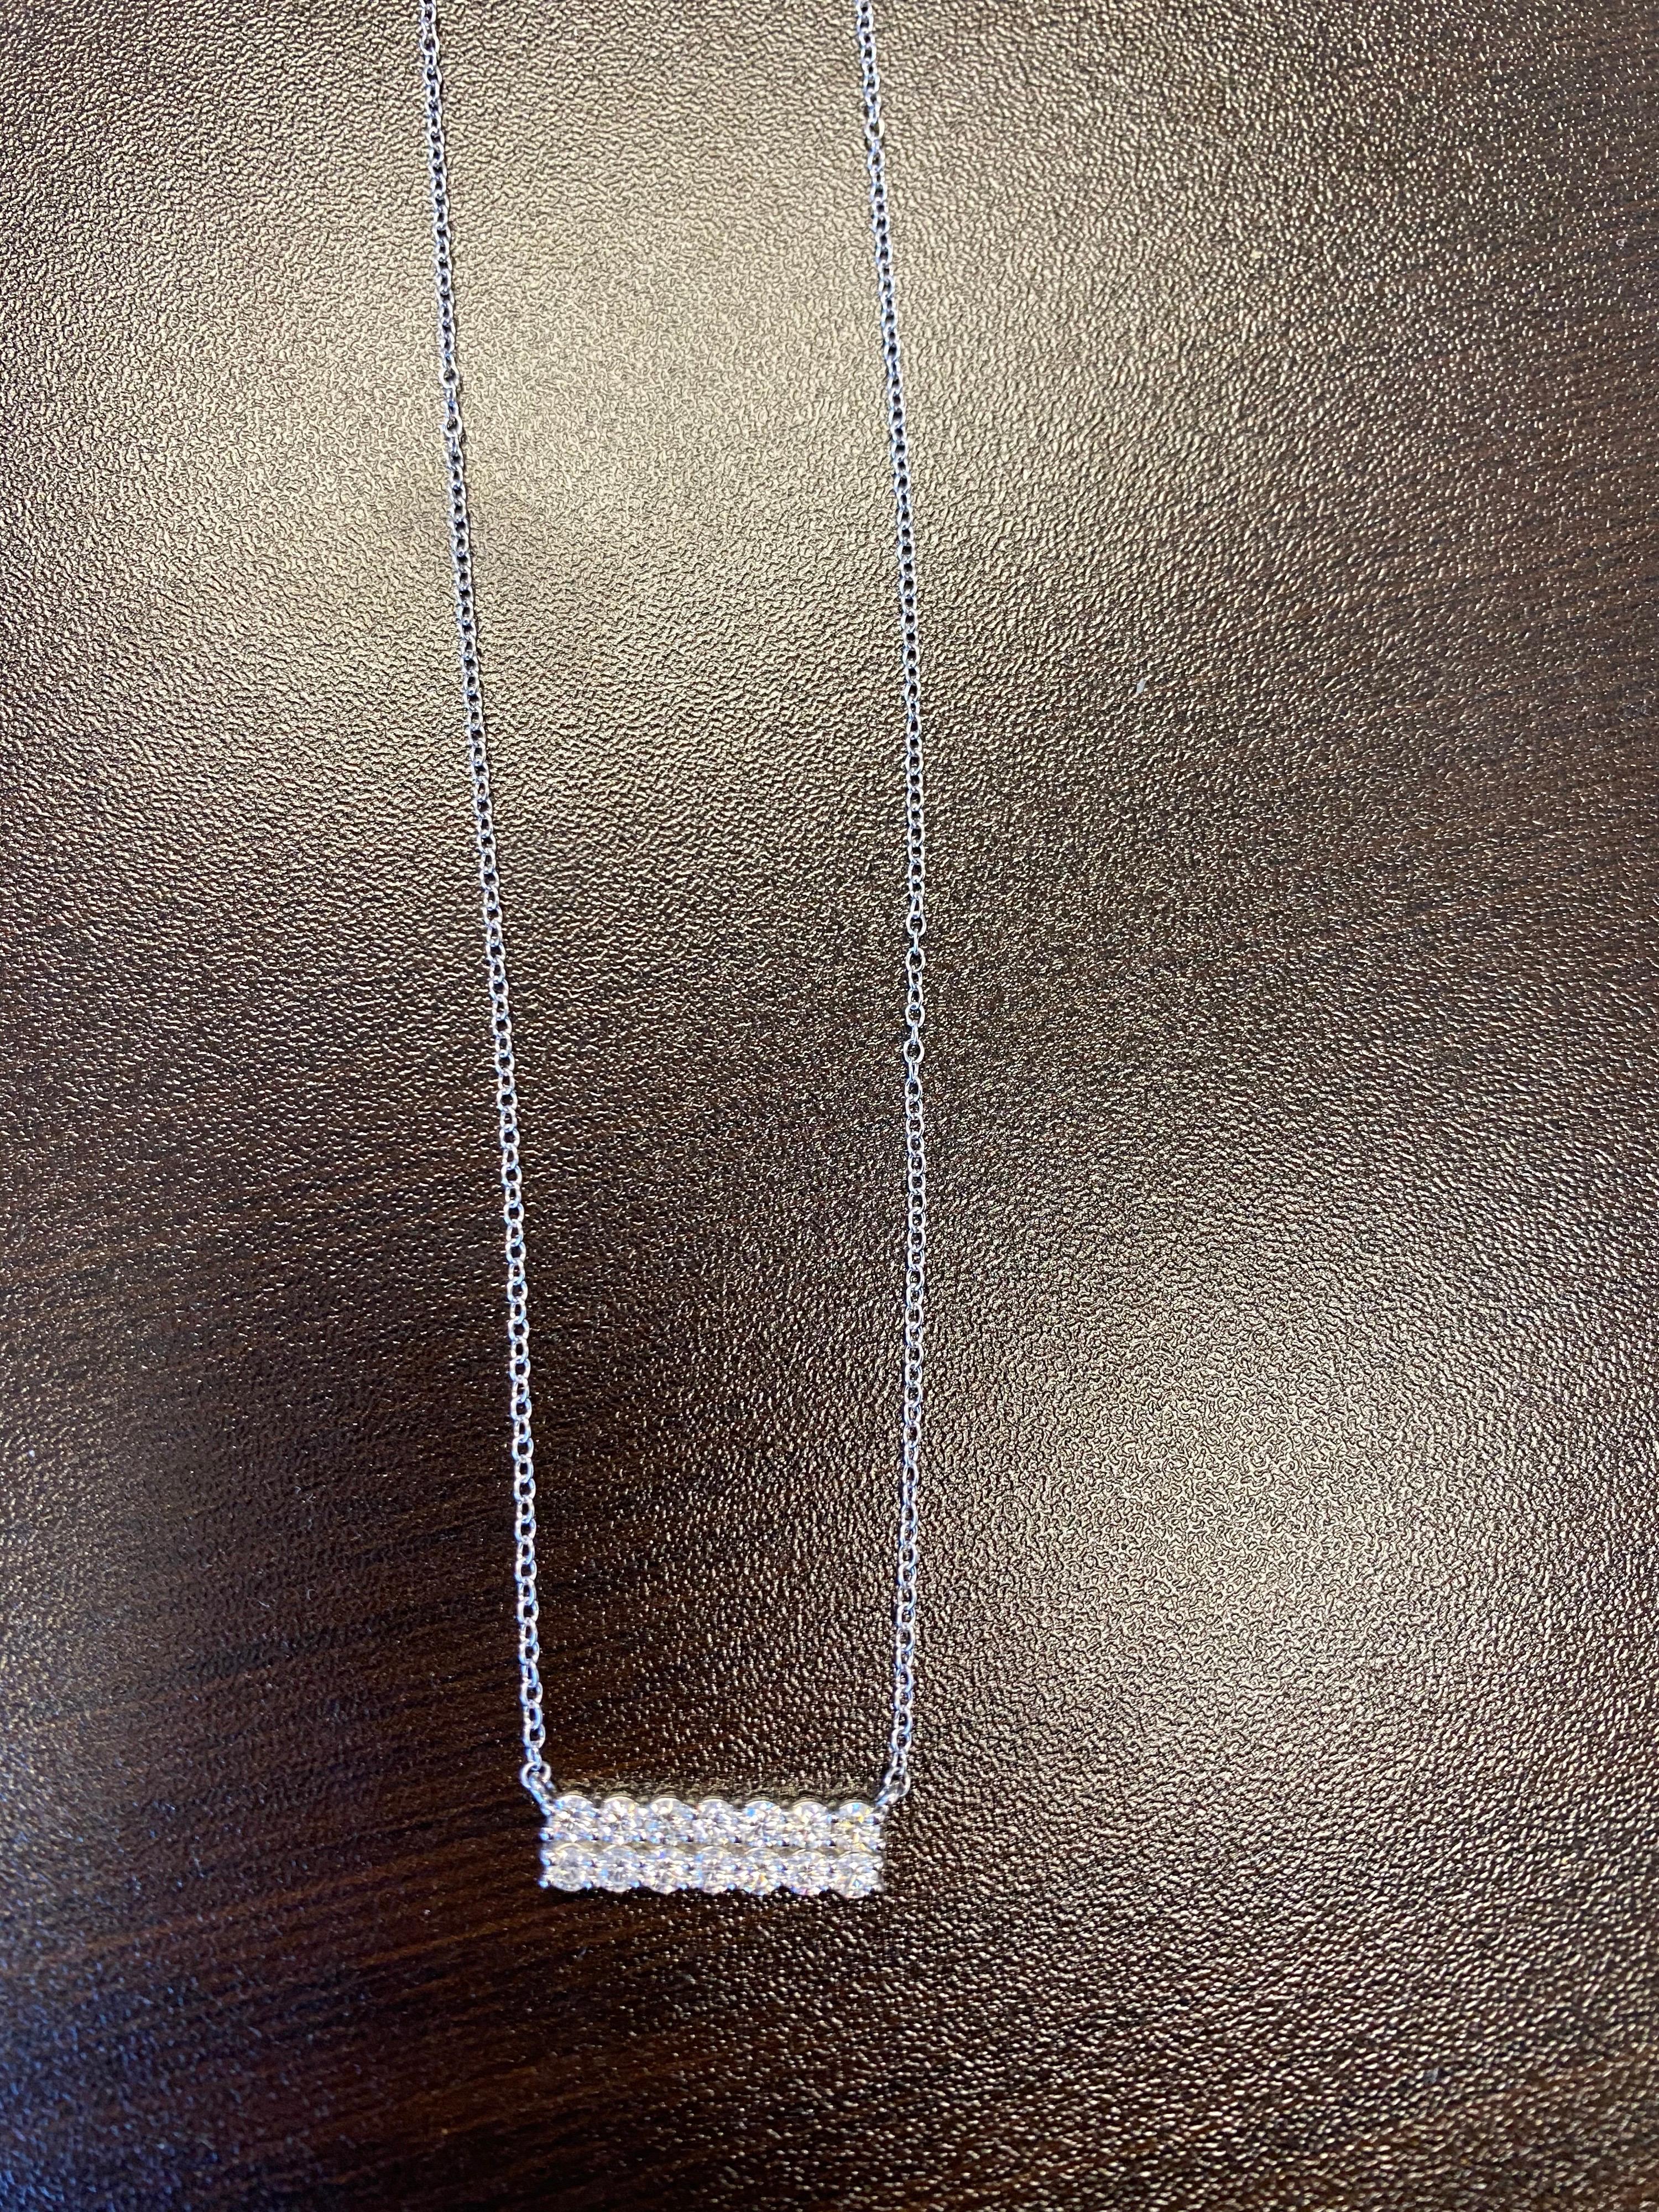 Diamond bar pendant set with 2 rows of diamonds in 14K white gold. The pendant is set with 14 stones, the total weight is 1 carat. The color of the stones are G, the clarity is SI1-SI2. The pendant is available in rose and yellow gold.